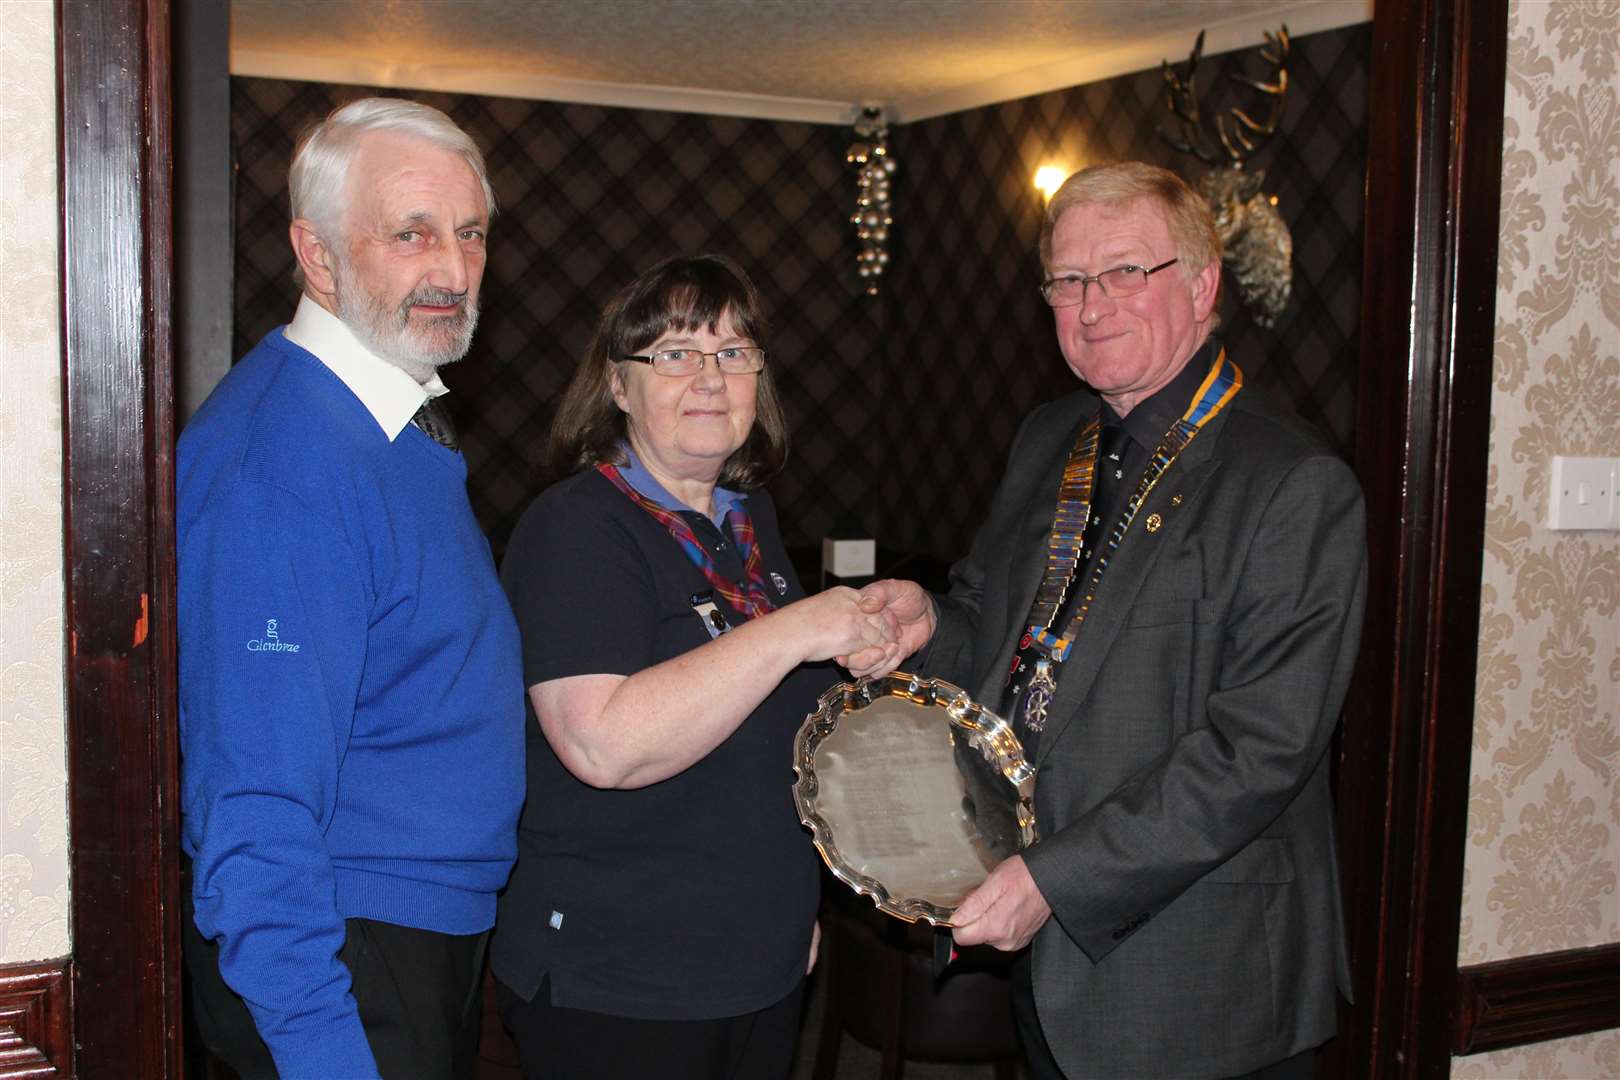 Turriff's current citizen of the year Mabel Webster being presented with the accolade by community convenor Robert Pirie and president Iain Matthews.